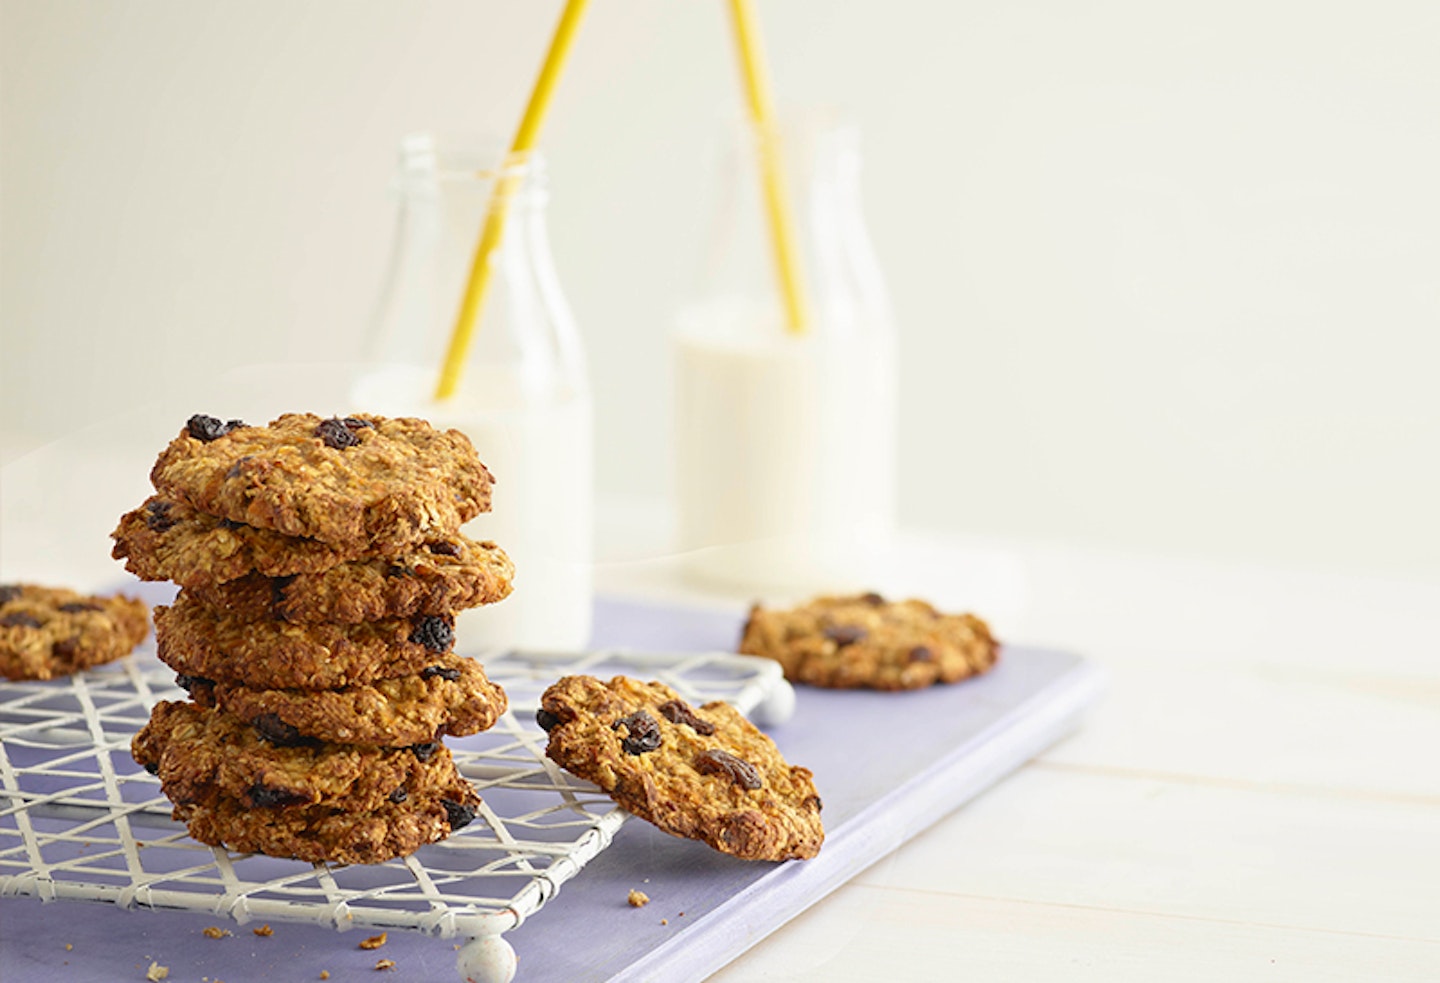 Carrot and banana cookies by Annabel Karmel